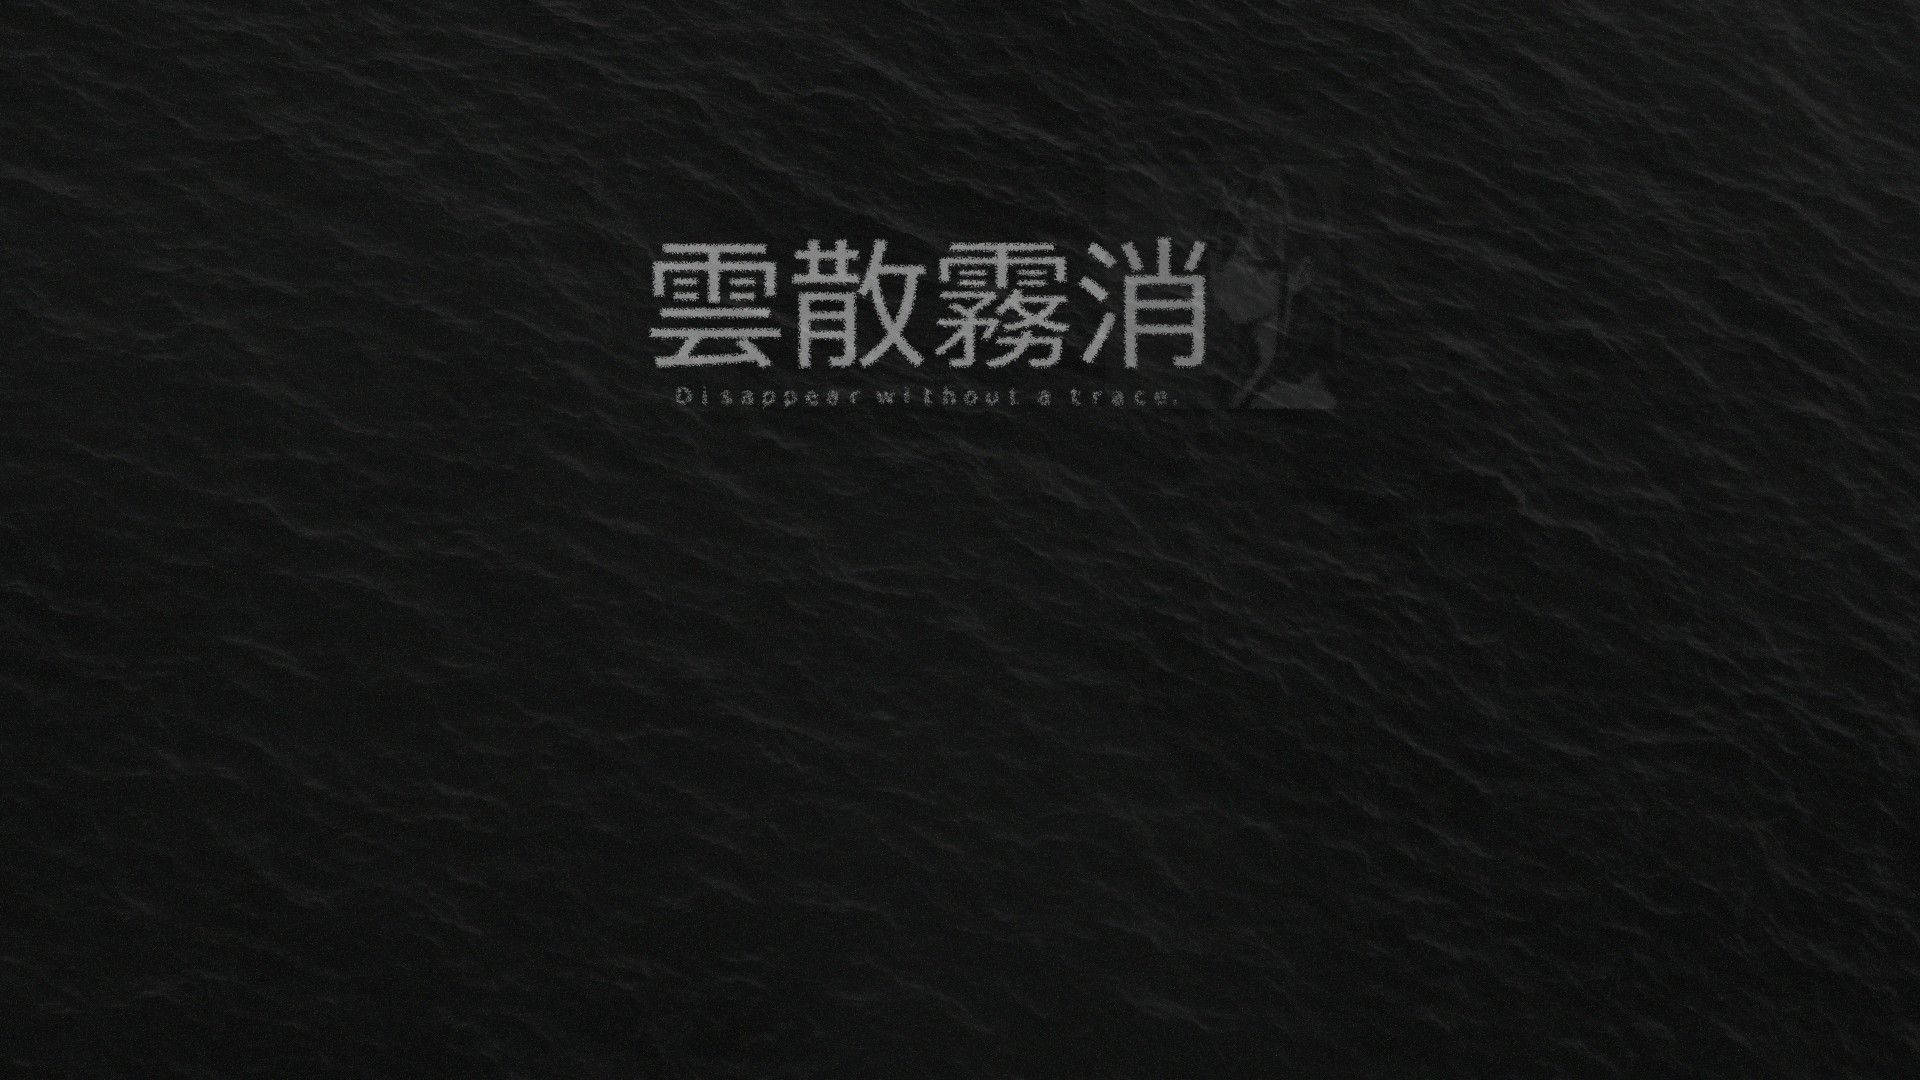 Dark Aesthetic Computer With Japanese Characters Wallpaper